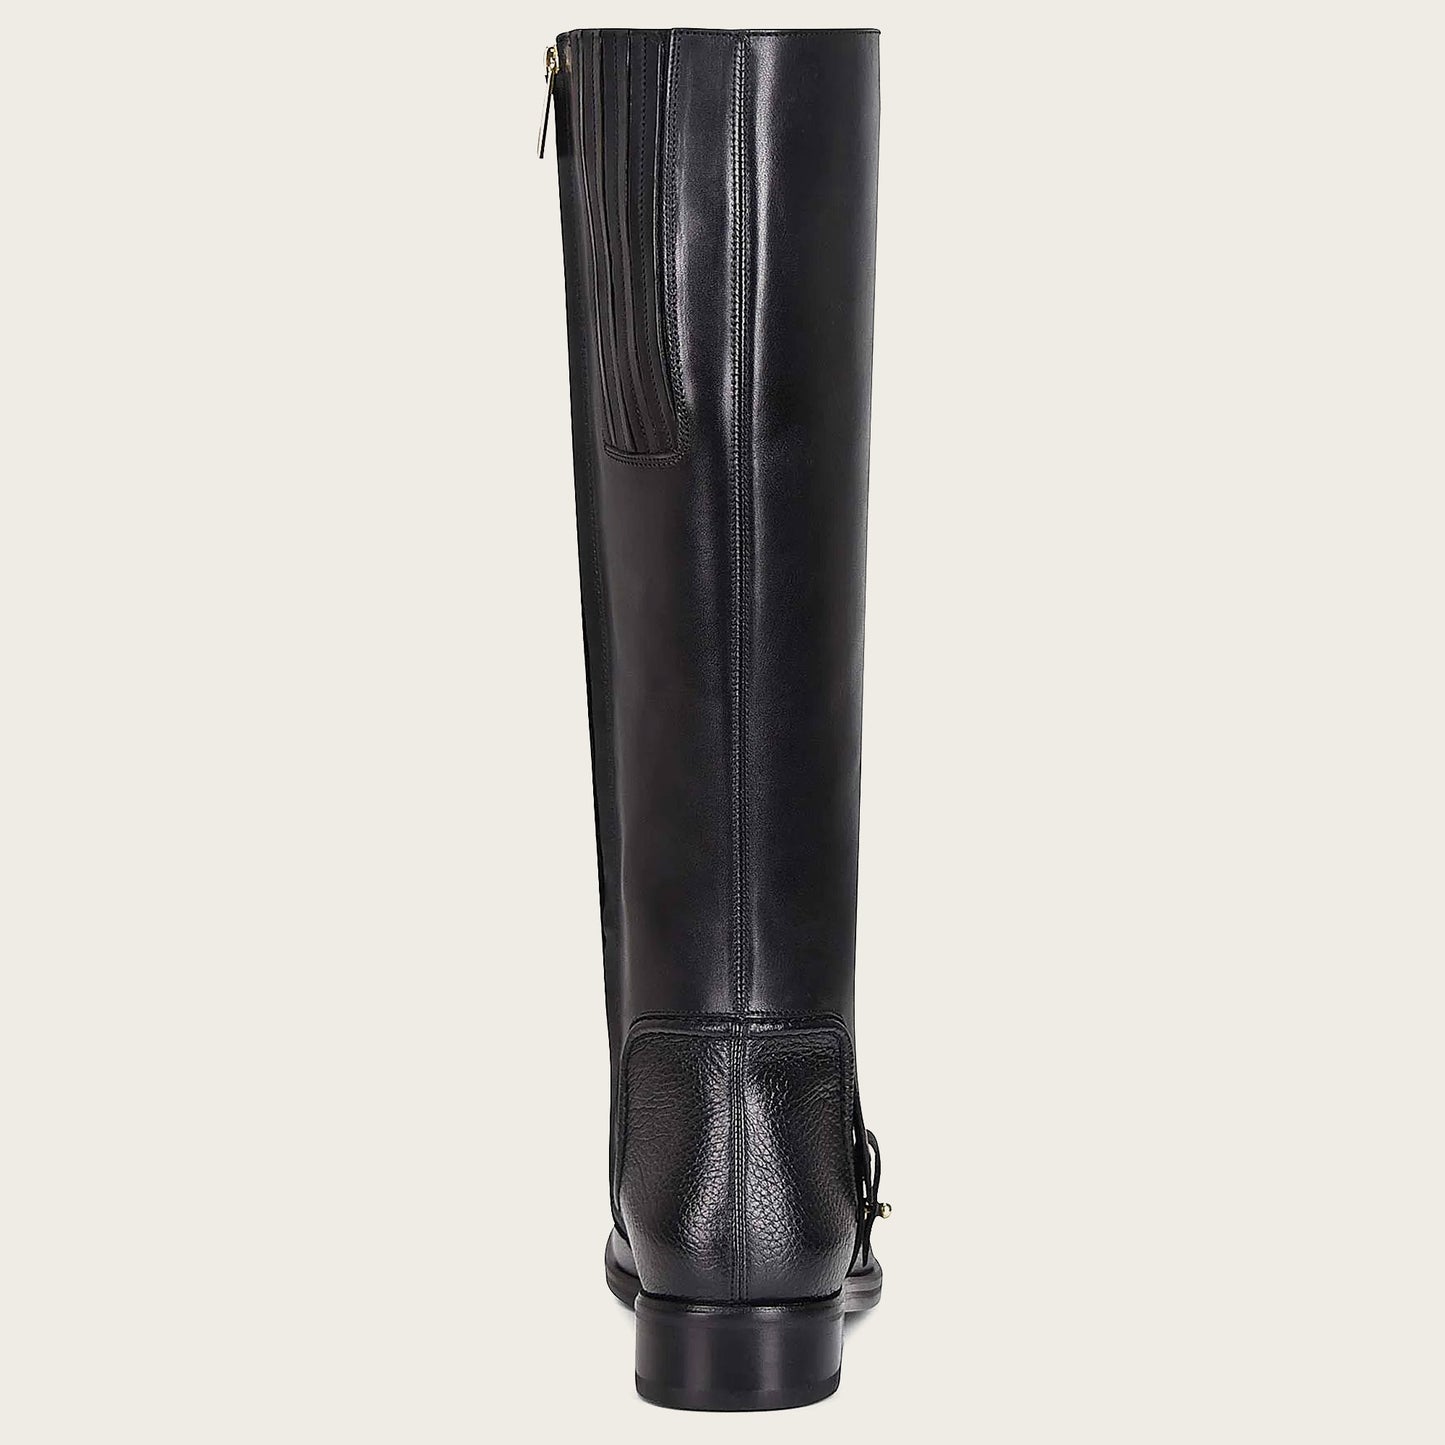 Experience the allure of hand-painted craftsmanship with this exquisite black leather riding boot.